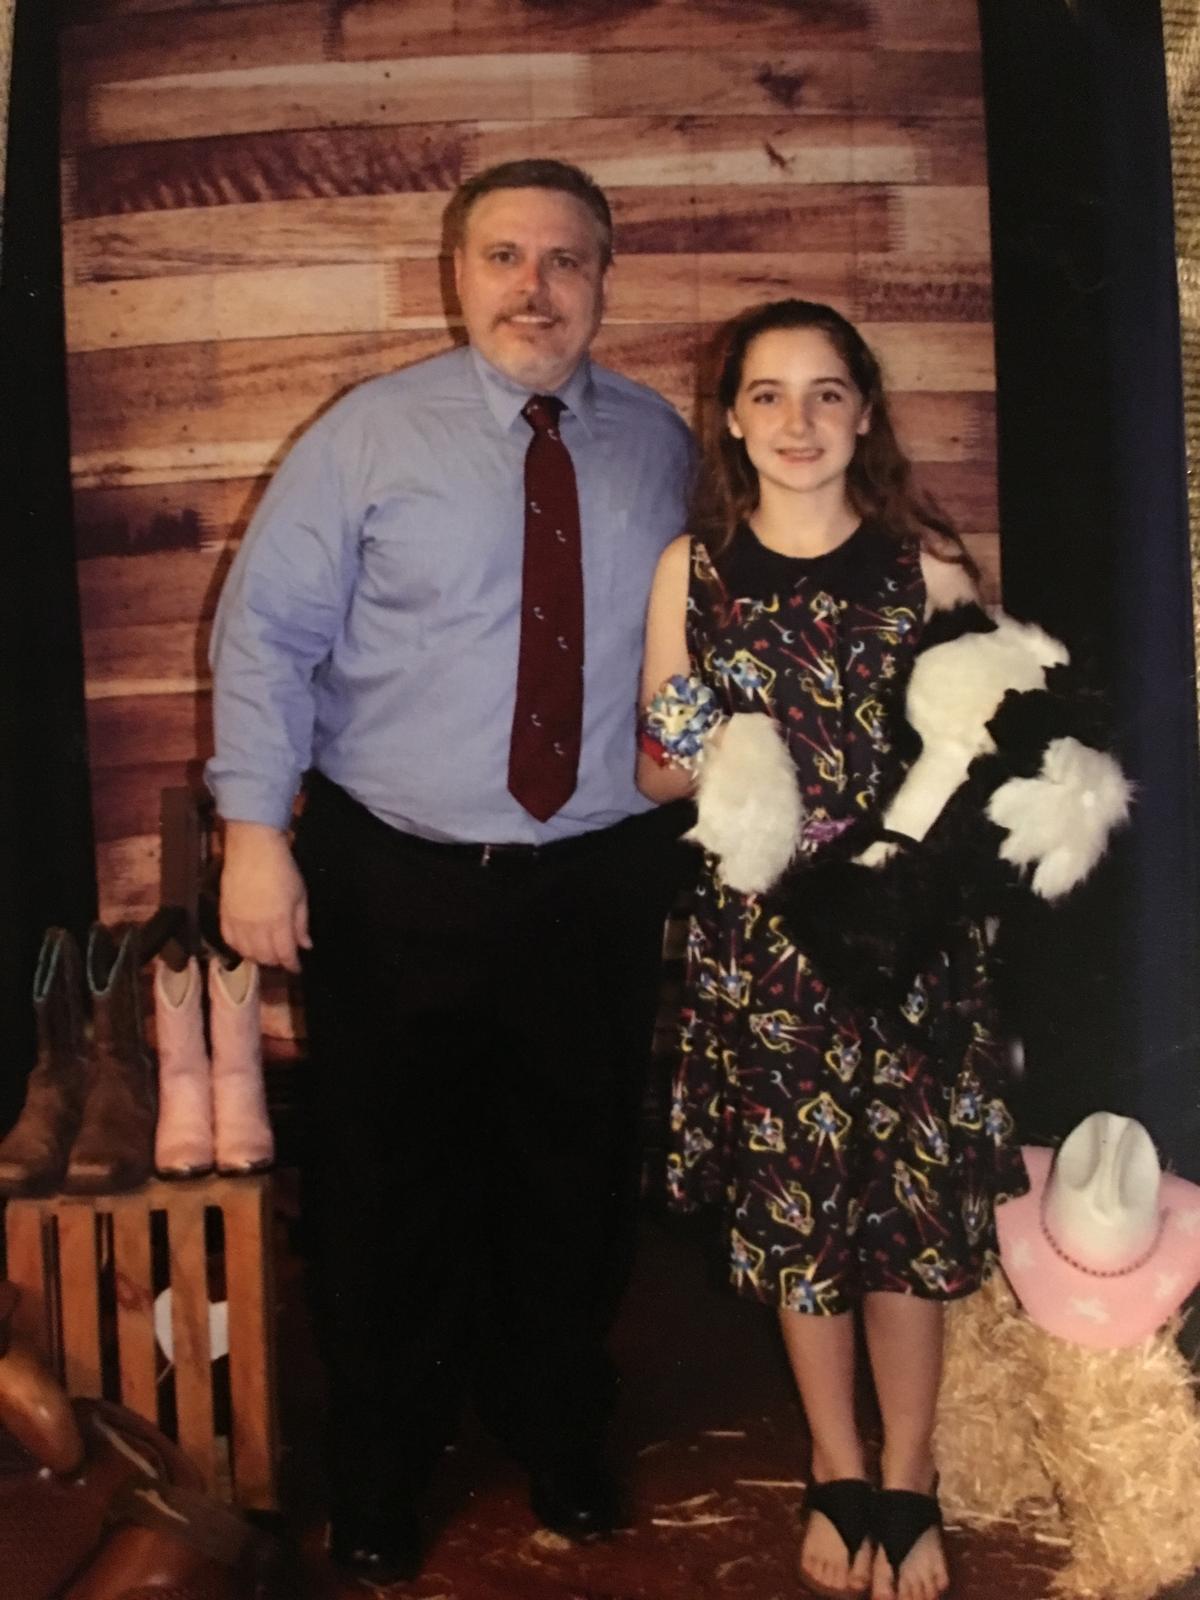 Shane and his daughter at the daddy-daughter dance. (Courtesy of Shane Santana)